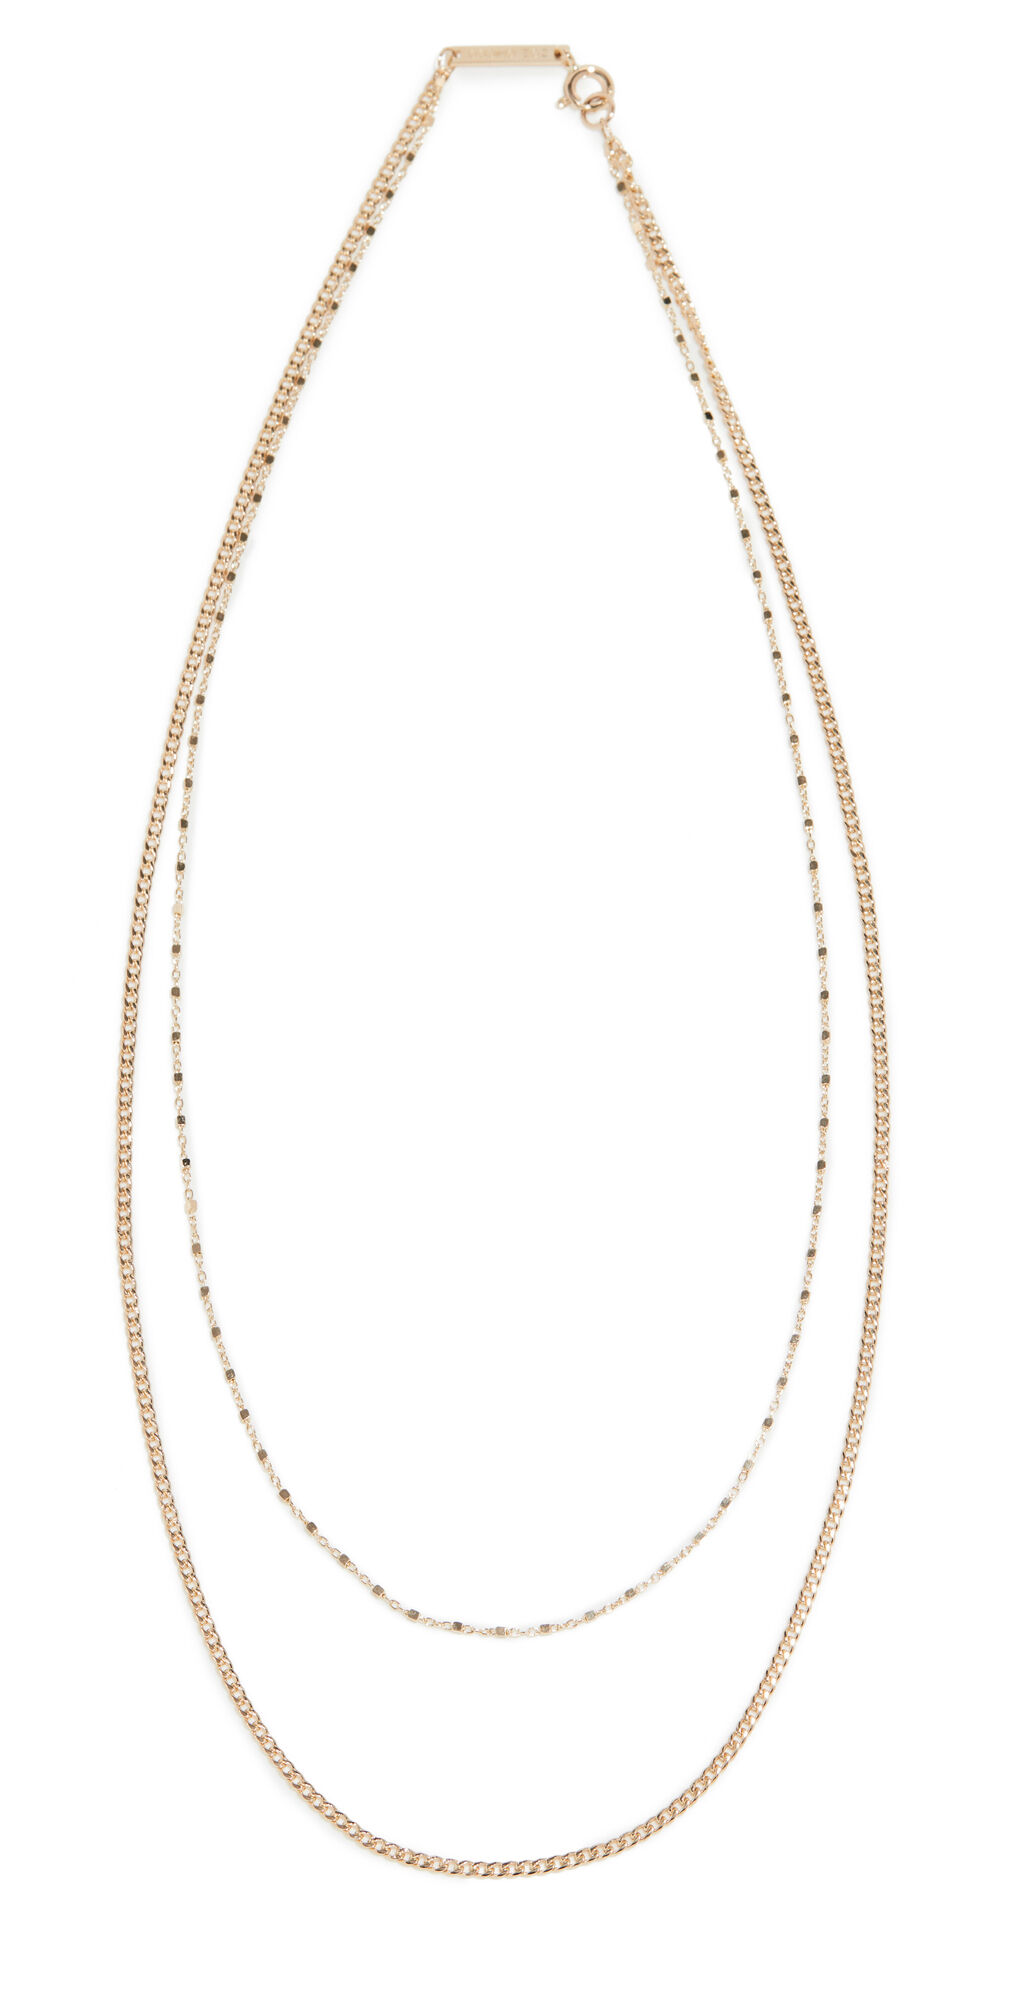 Chicco Zoe Chicco Heavy Metal Necklace Yellow Gold One Size  Yellow Gold  size:One Size